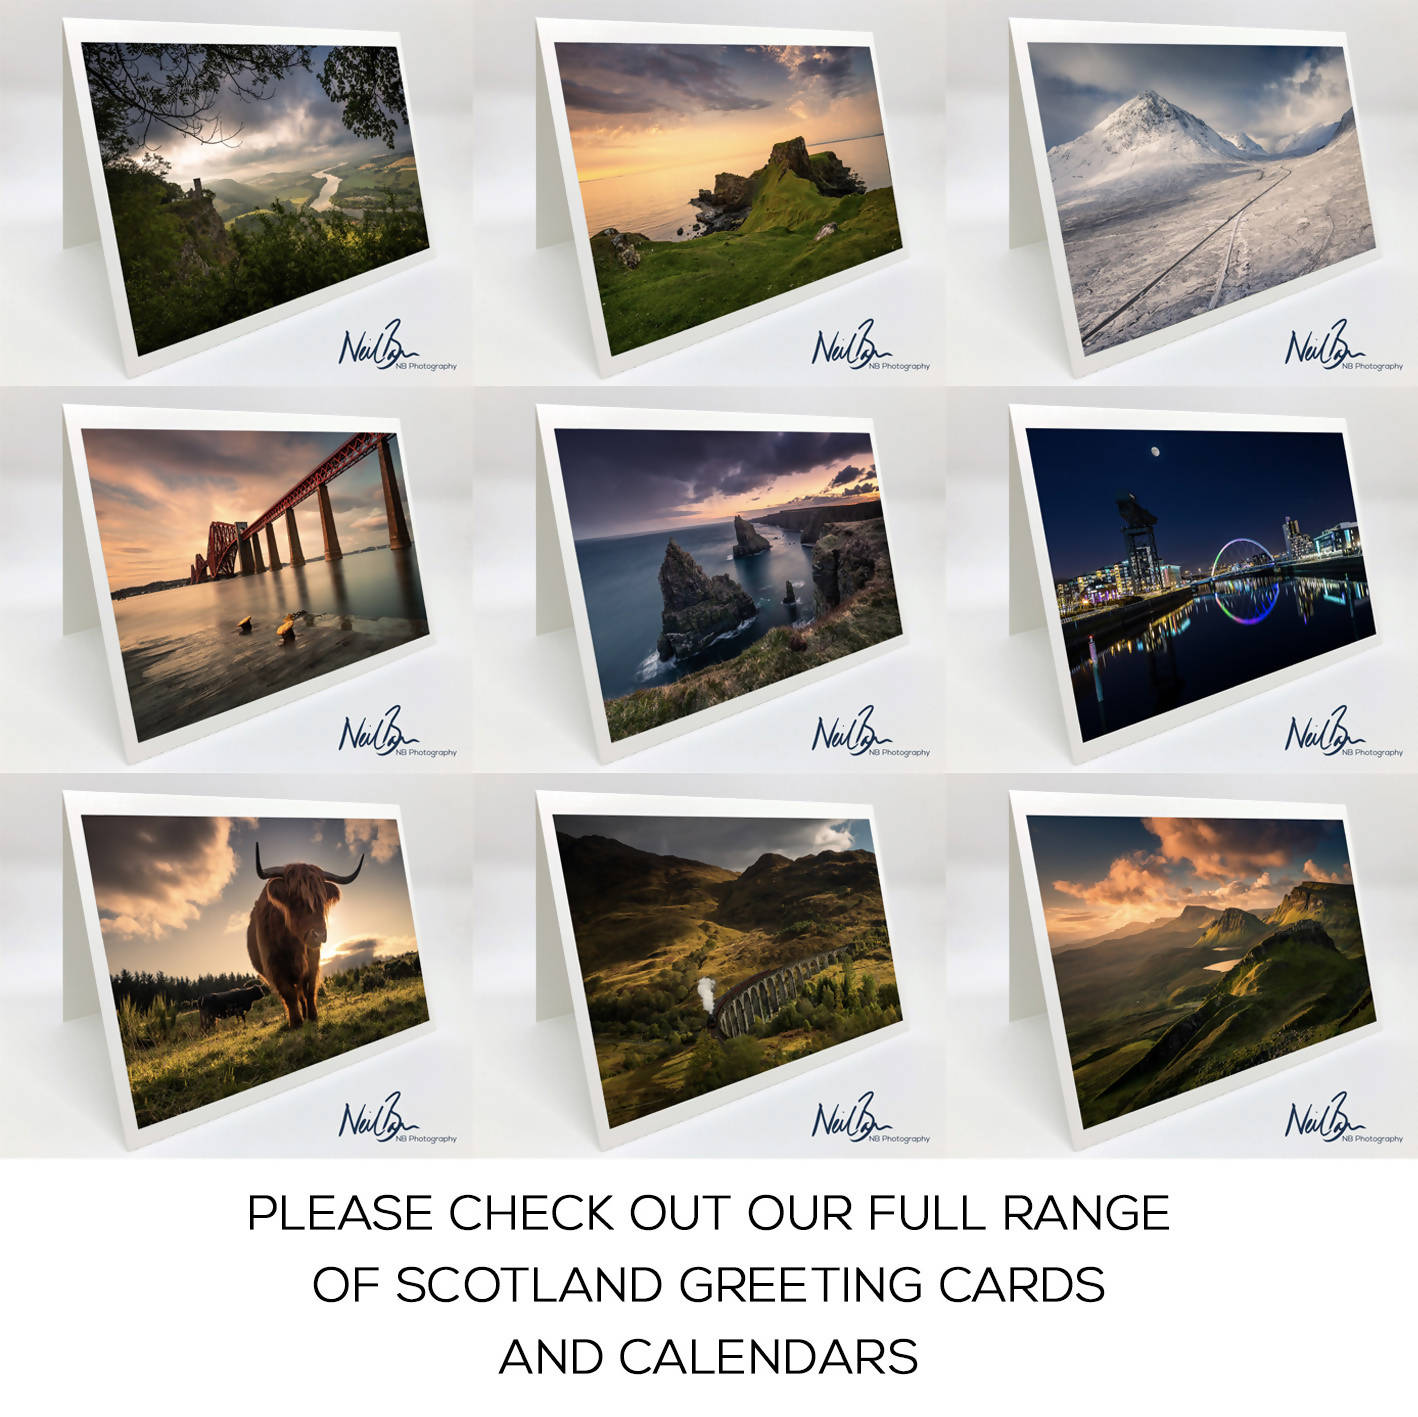 The Three Bridges over Firth of Forth - Scotland Greeting Card - Blank Inside